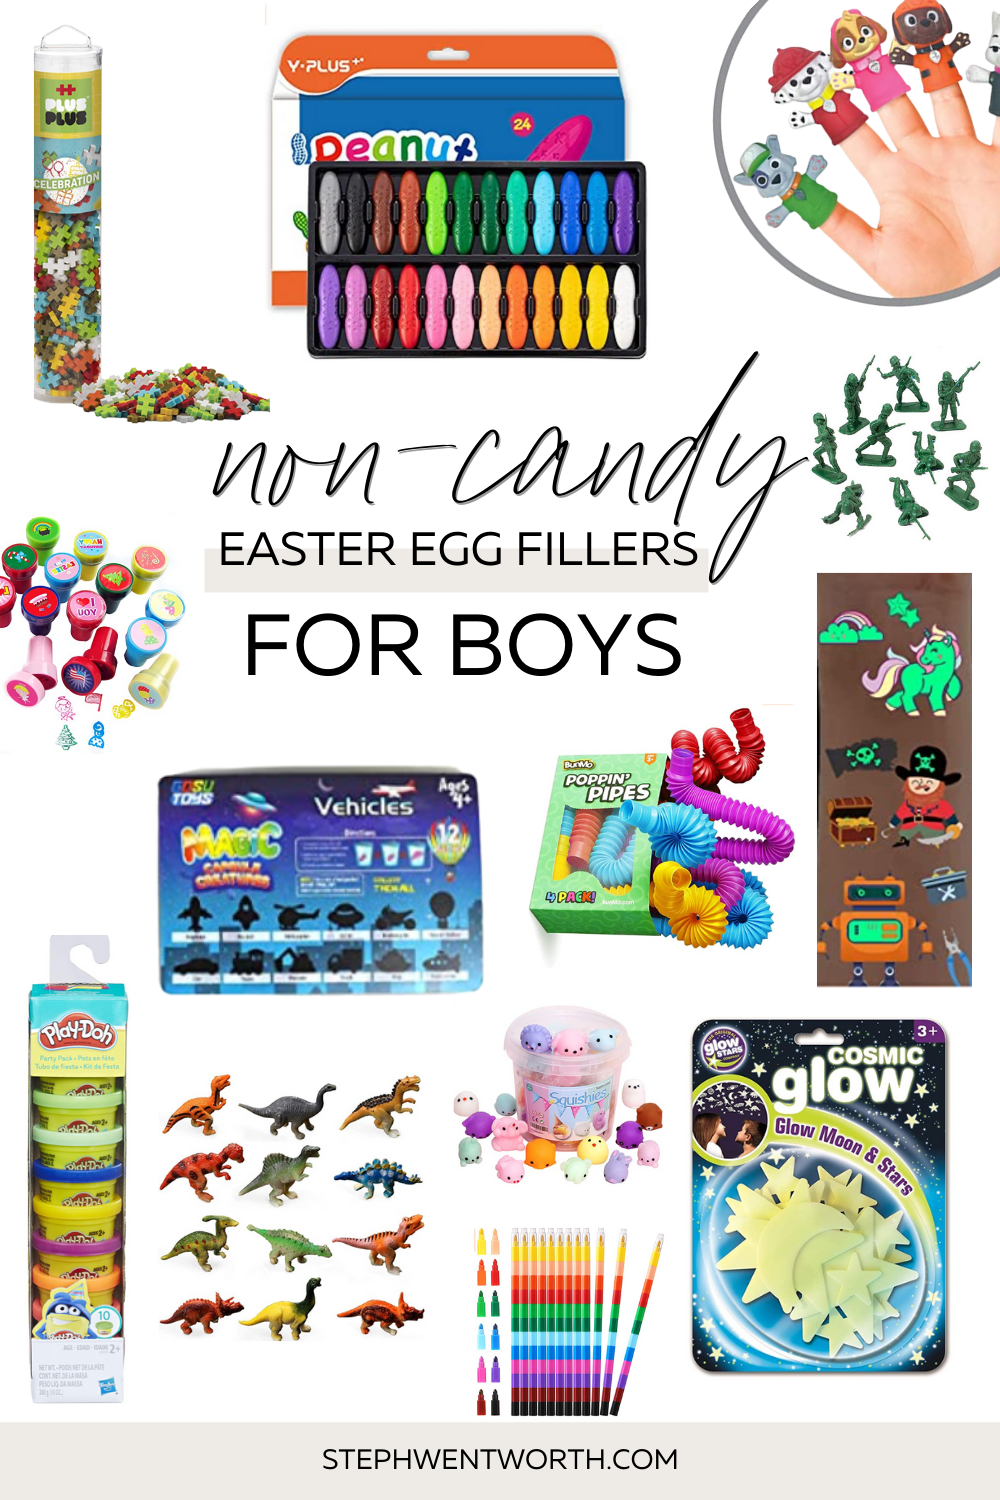 Easter Egg Fillers for Boys Non-Candy Ideas - Steph Leighworthy